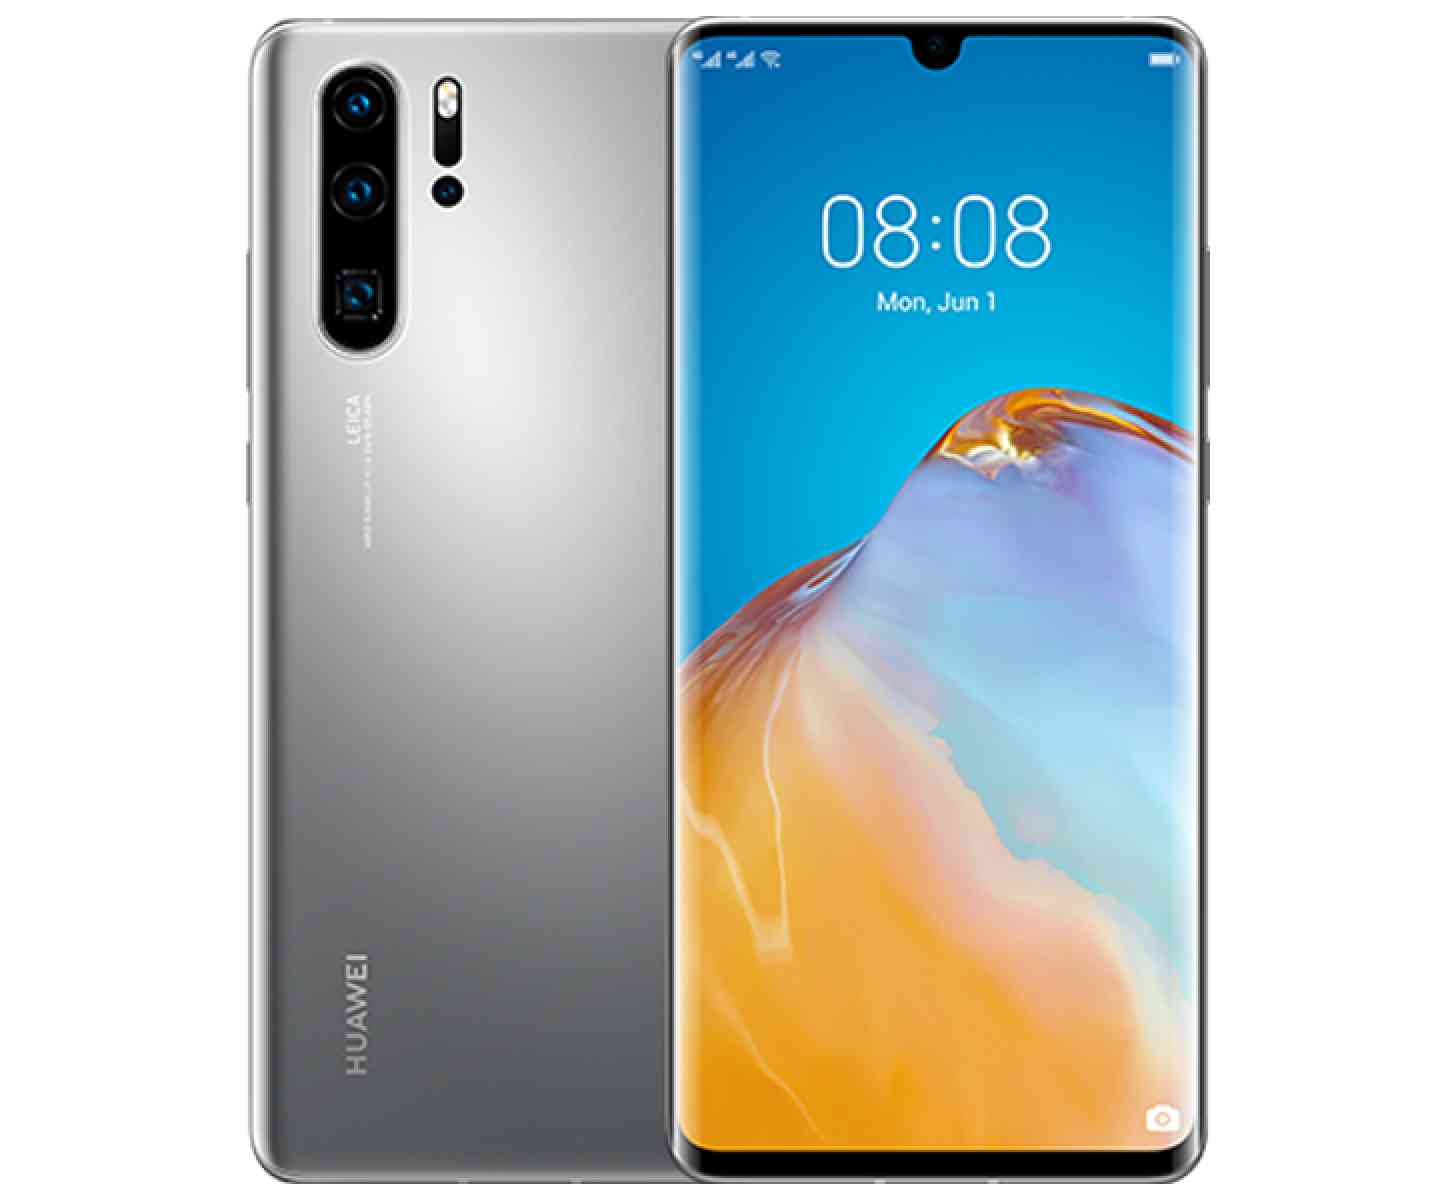 Huawei p30 Pro New Edition. Huawei Vog-l29. Хуавей ай 12. Хуавей p2 Pro. Huawei p30 new edition